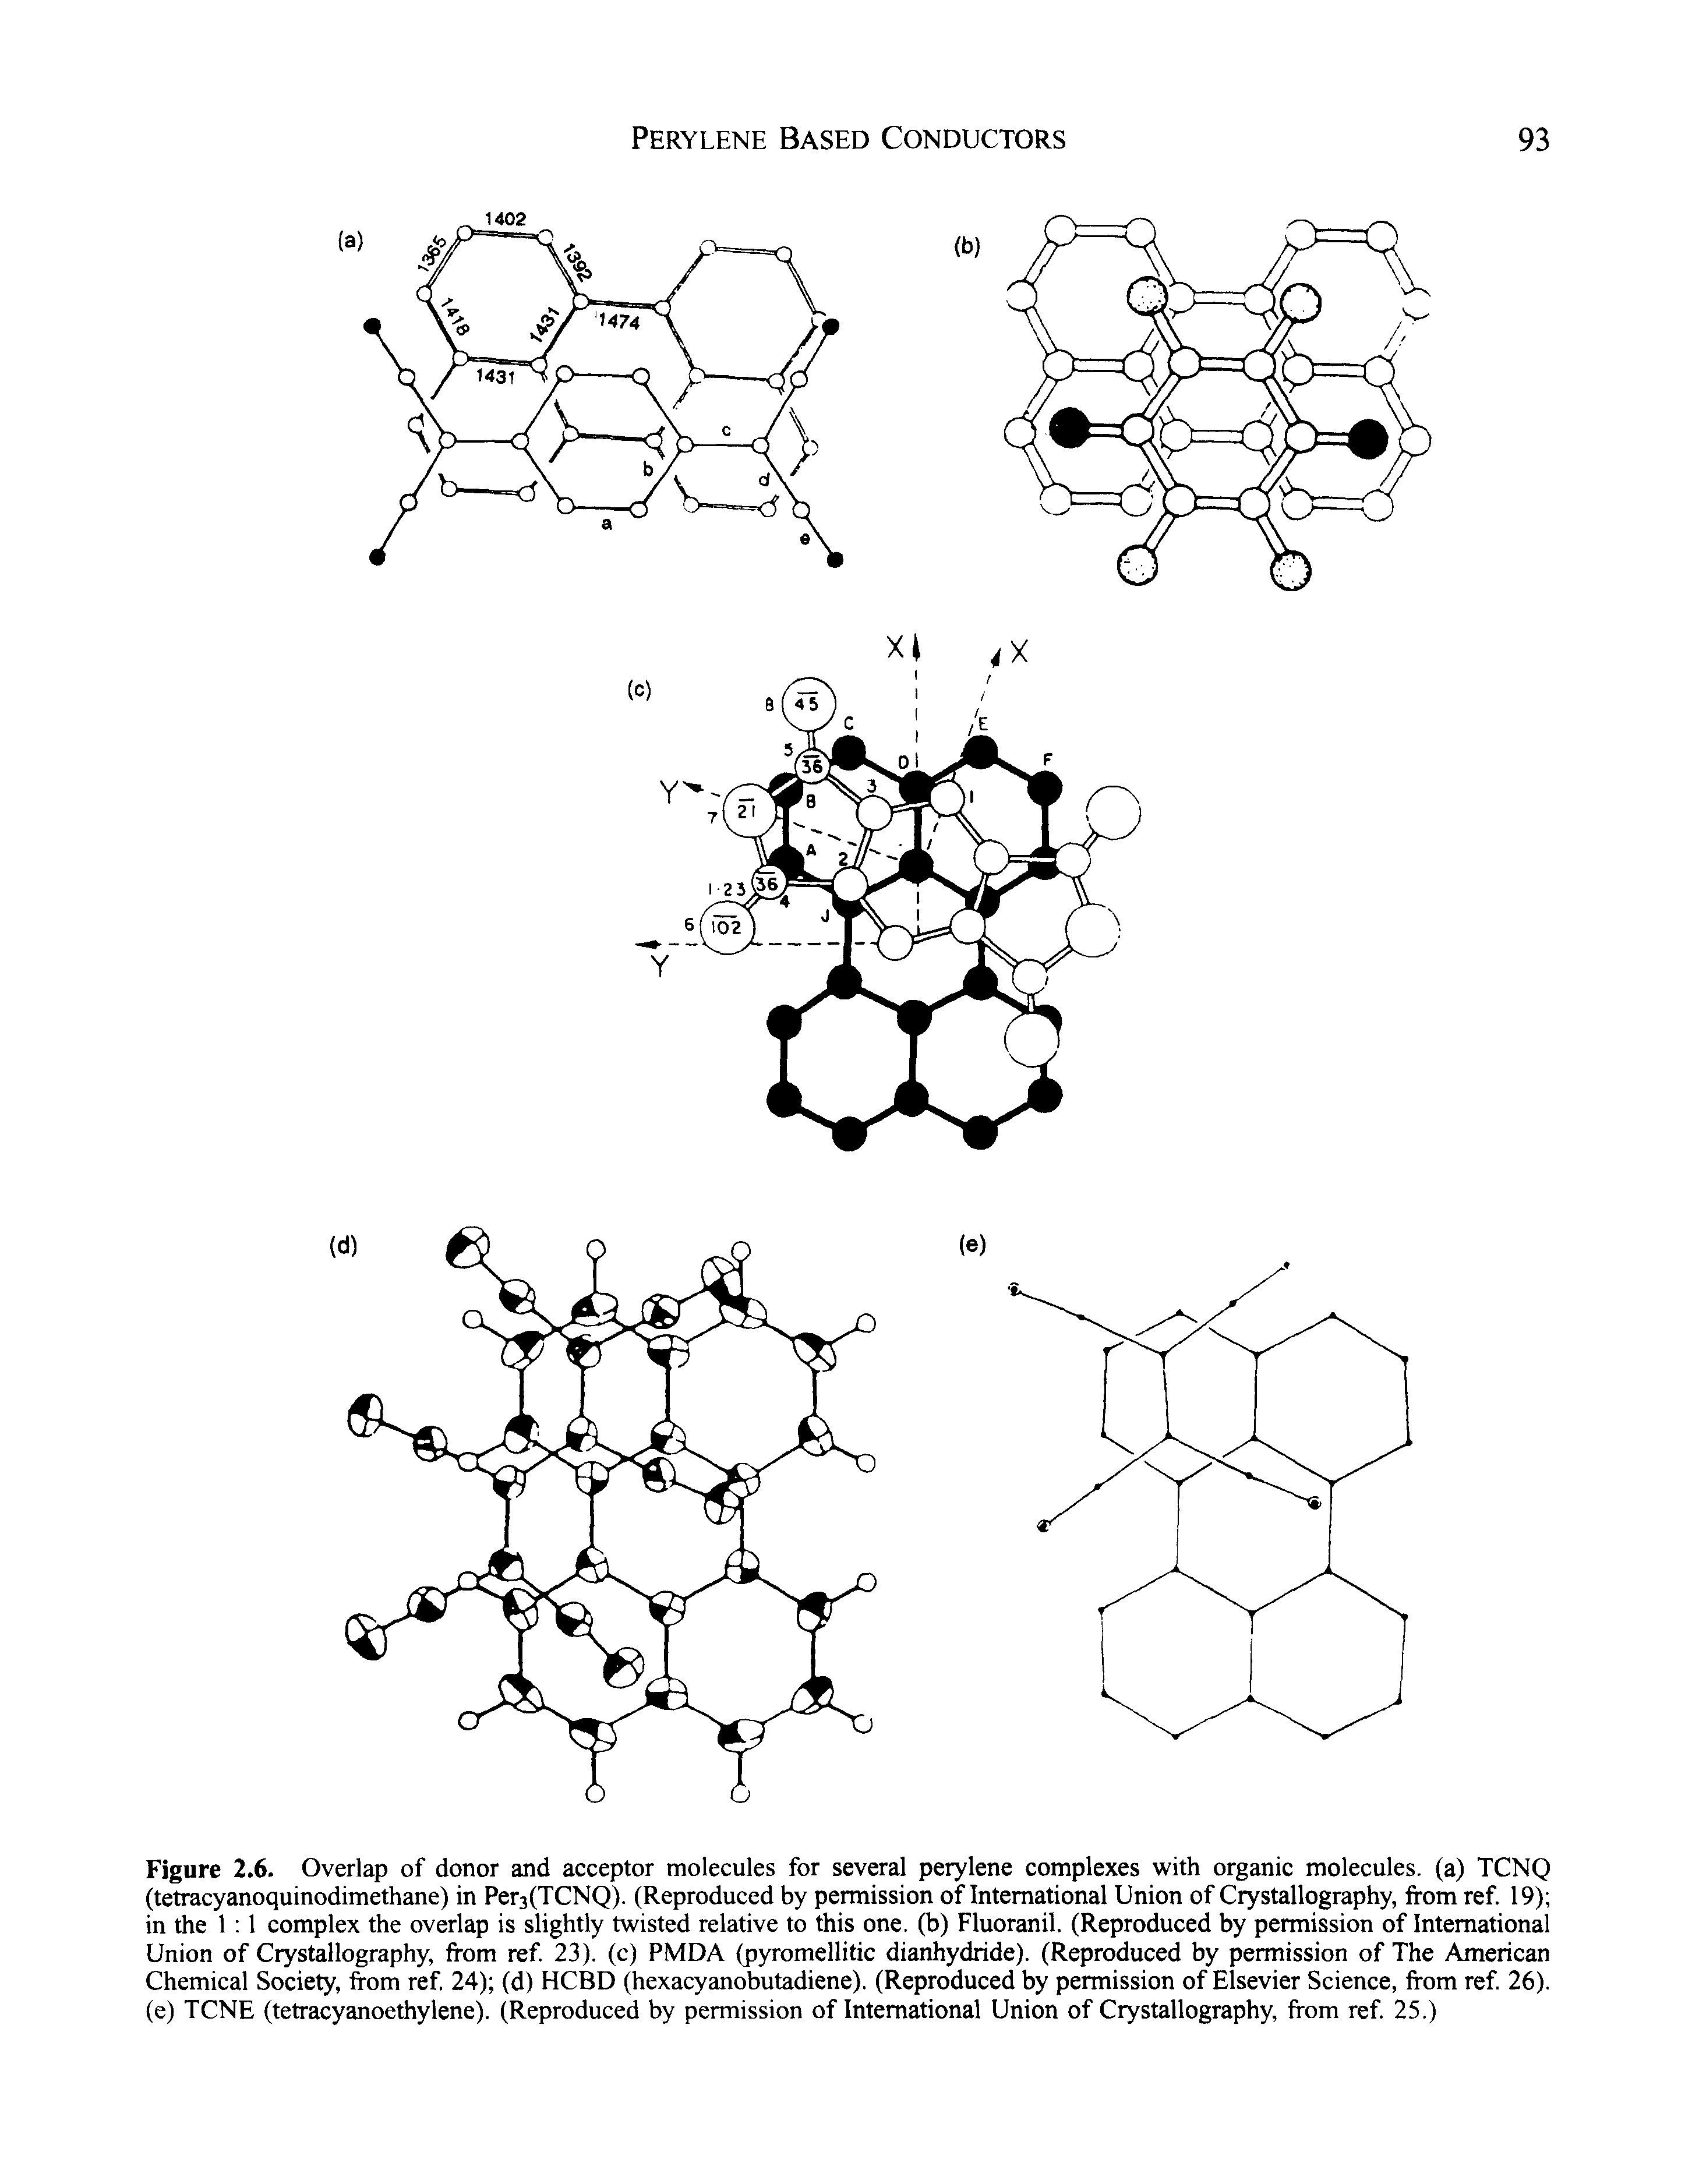 Figure 2.6. Overlap of donor and acceptor molecules for several perylene complexes with organic molecules, (a) TCNQ (tetracyanoquinodimethane) in Per3(TCNQ). (Reproduced by permission of International Union of Crystallography, from ref. 19) in the 1 1 complex the overlap is slightly twisted relative to this one. (b) Fluoranil. (Reproduced by permission of International Union of Crystallography, from ref. 23). (c) PMDA (pyxomellitic dianhydride). (Reproduced by permission of The American Chemical Society, from ref 24) (d) HCBD (hexacyanobutadiene). (Reproduced by permission of Elsevier Science, from ref 26). (e) TCNE (tetracyanoethylene). (Reproduced by permission of International Union of Crystallography, from ref 25.)...